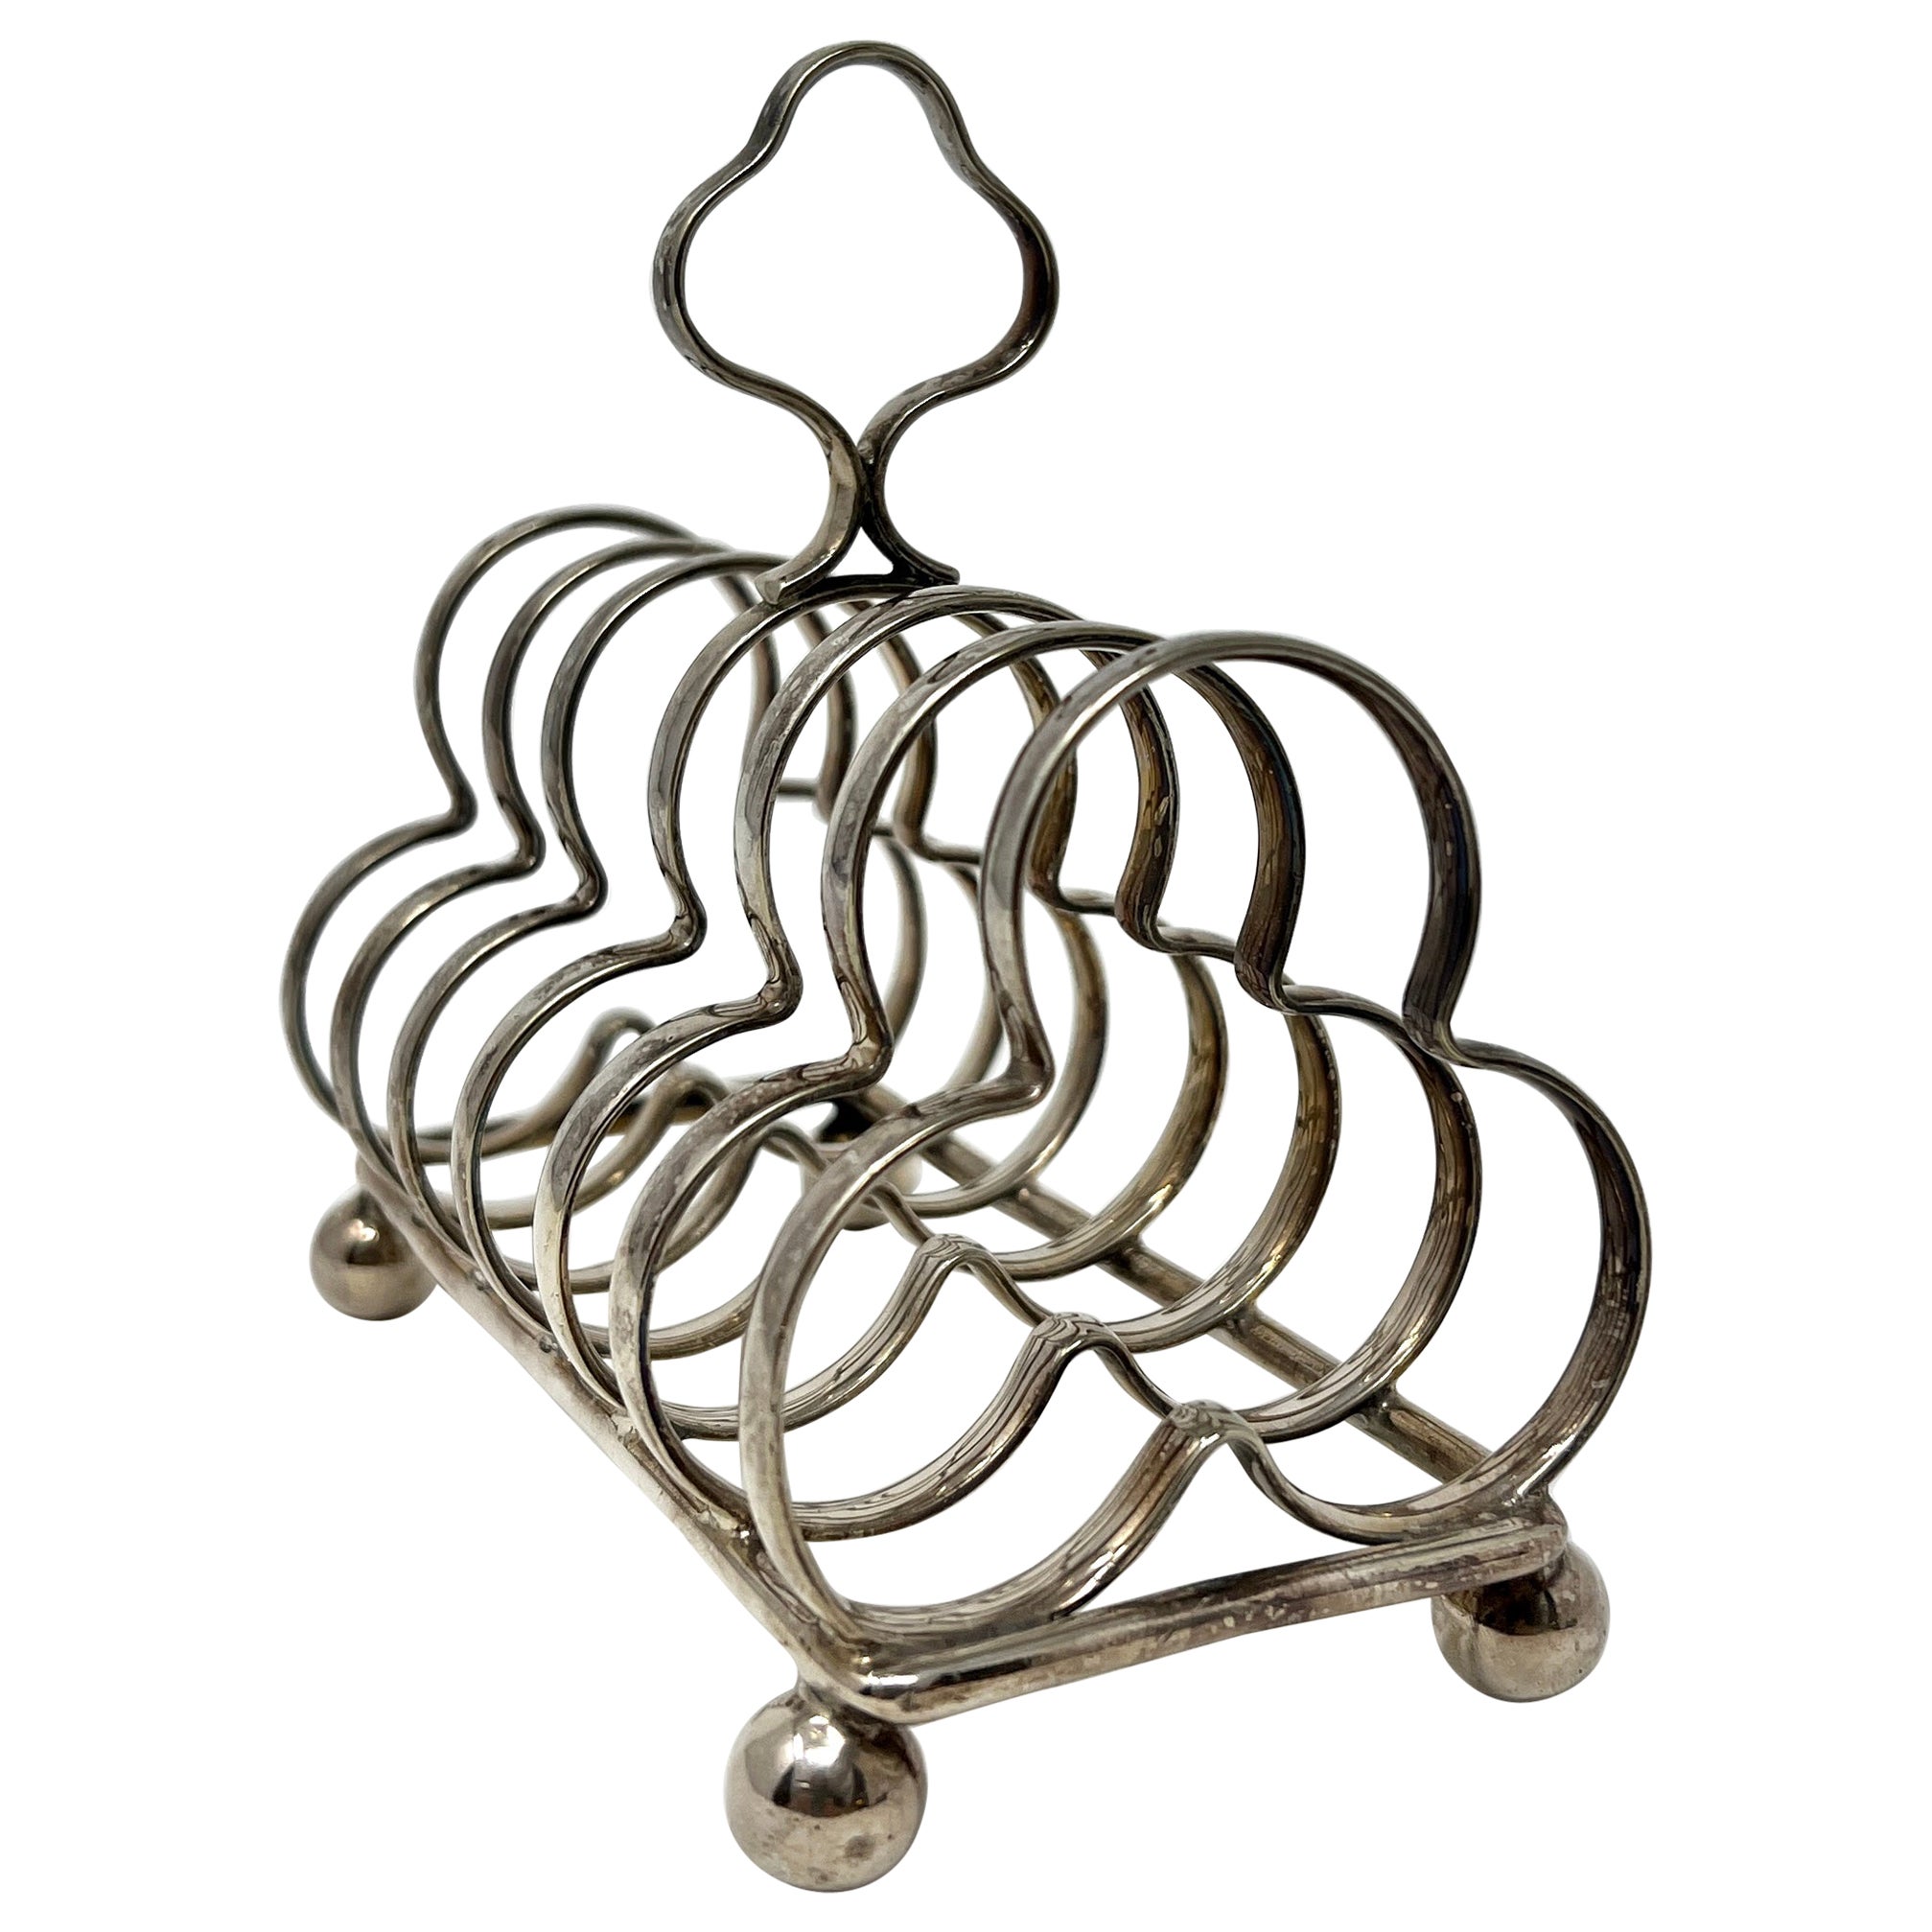 Antique English Silver Plated Toast Rack c 1890-1900